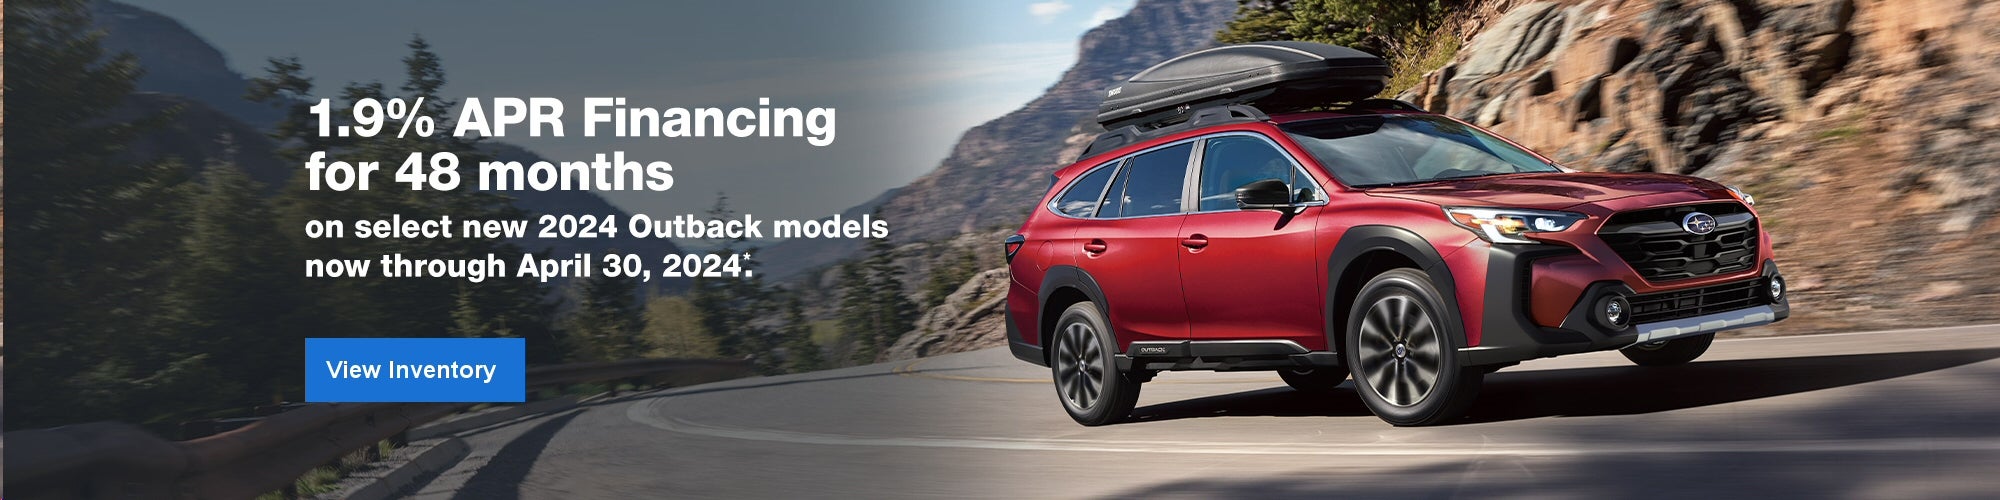 1.9% APR Financing on select new 2024 Outback models*